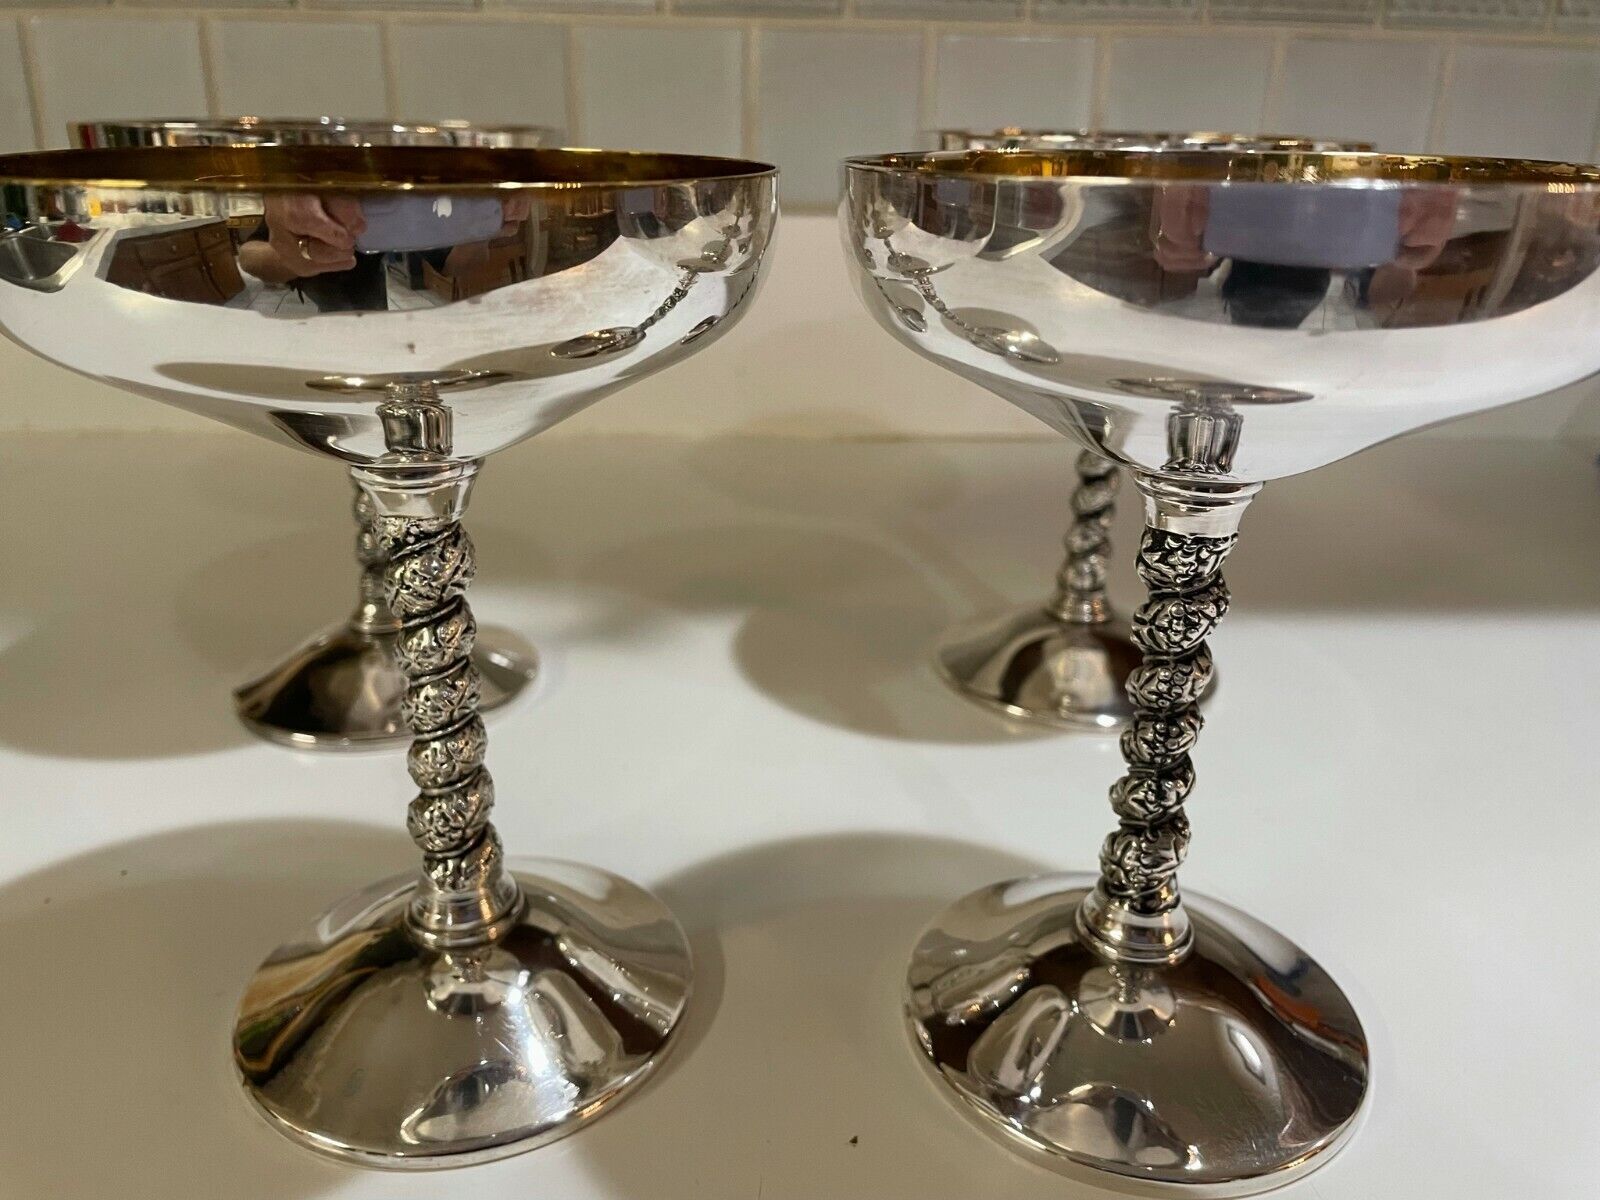 Valero Silverplate Champagne Goblets from Spain - Set of 4